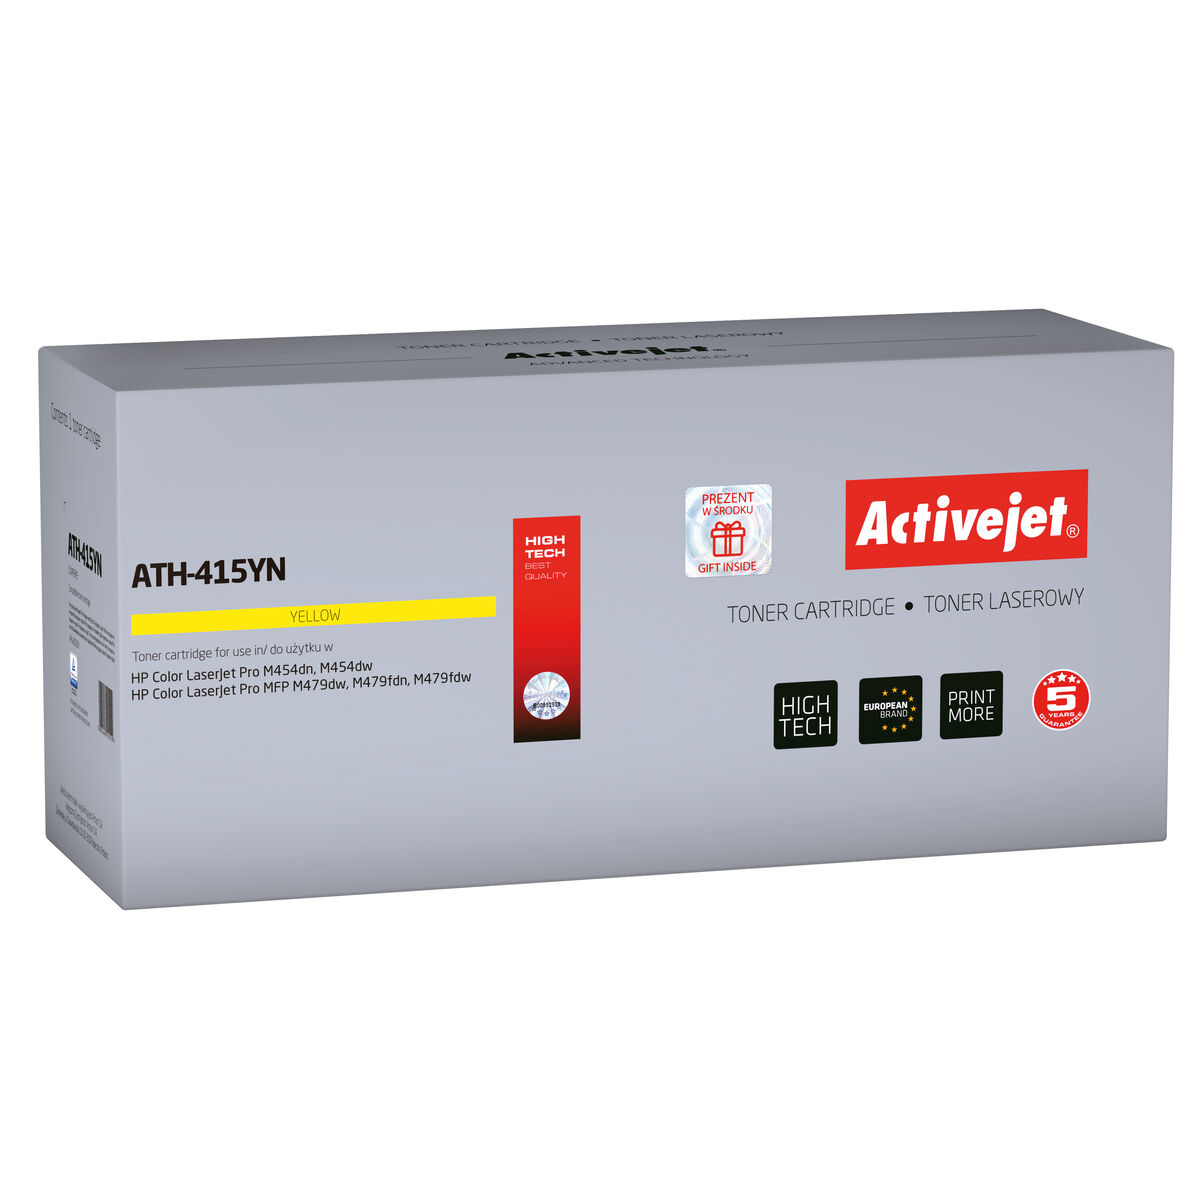 Toner Activejet ATH-415YN CHIP                  2100 Pages Jaune